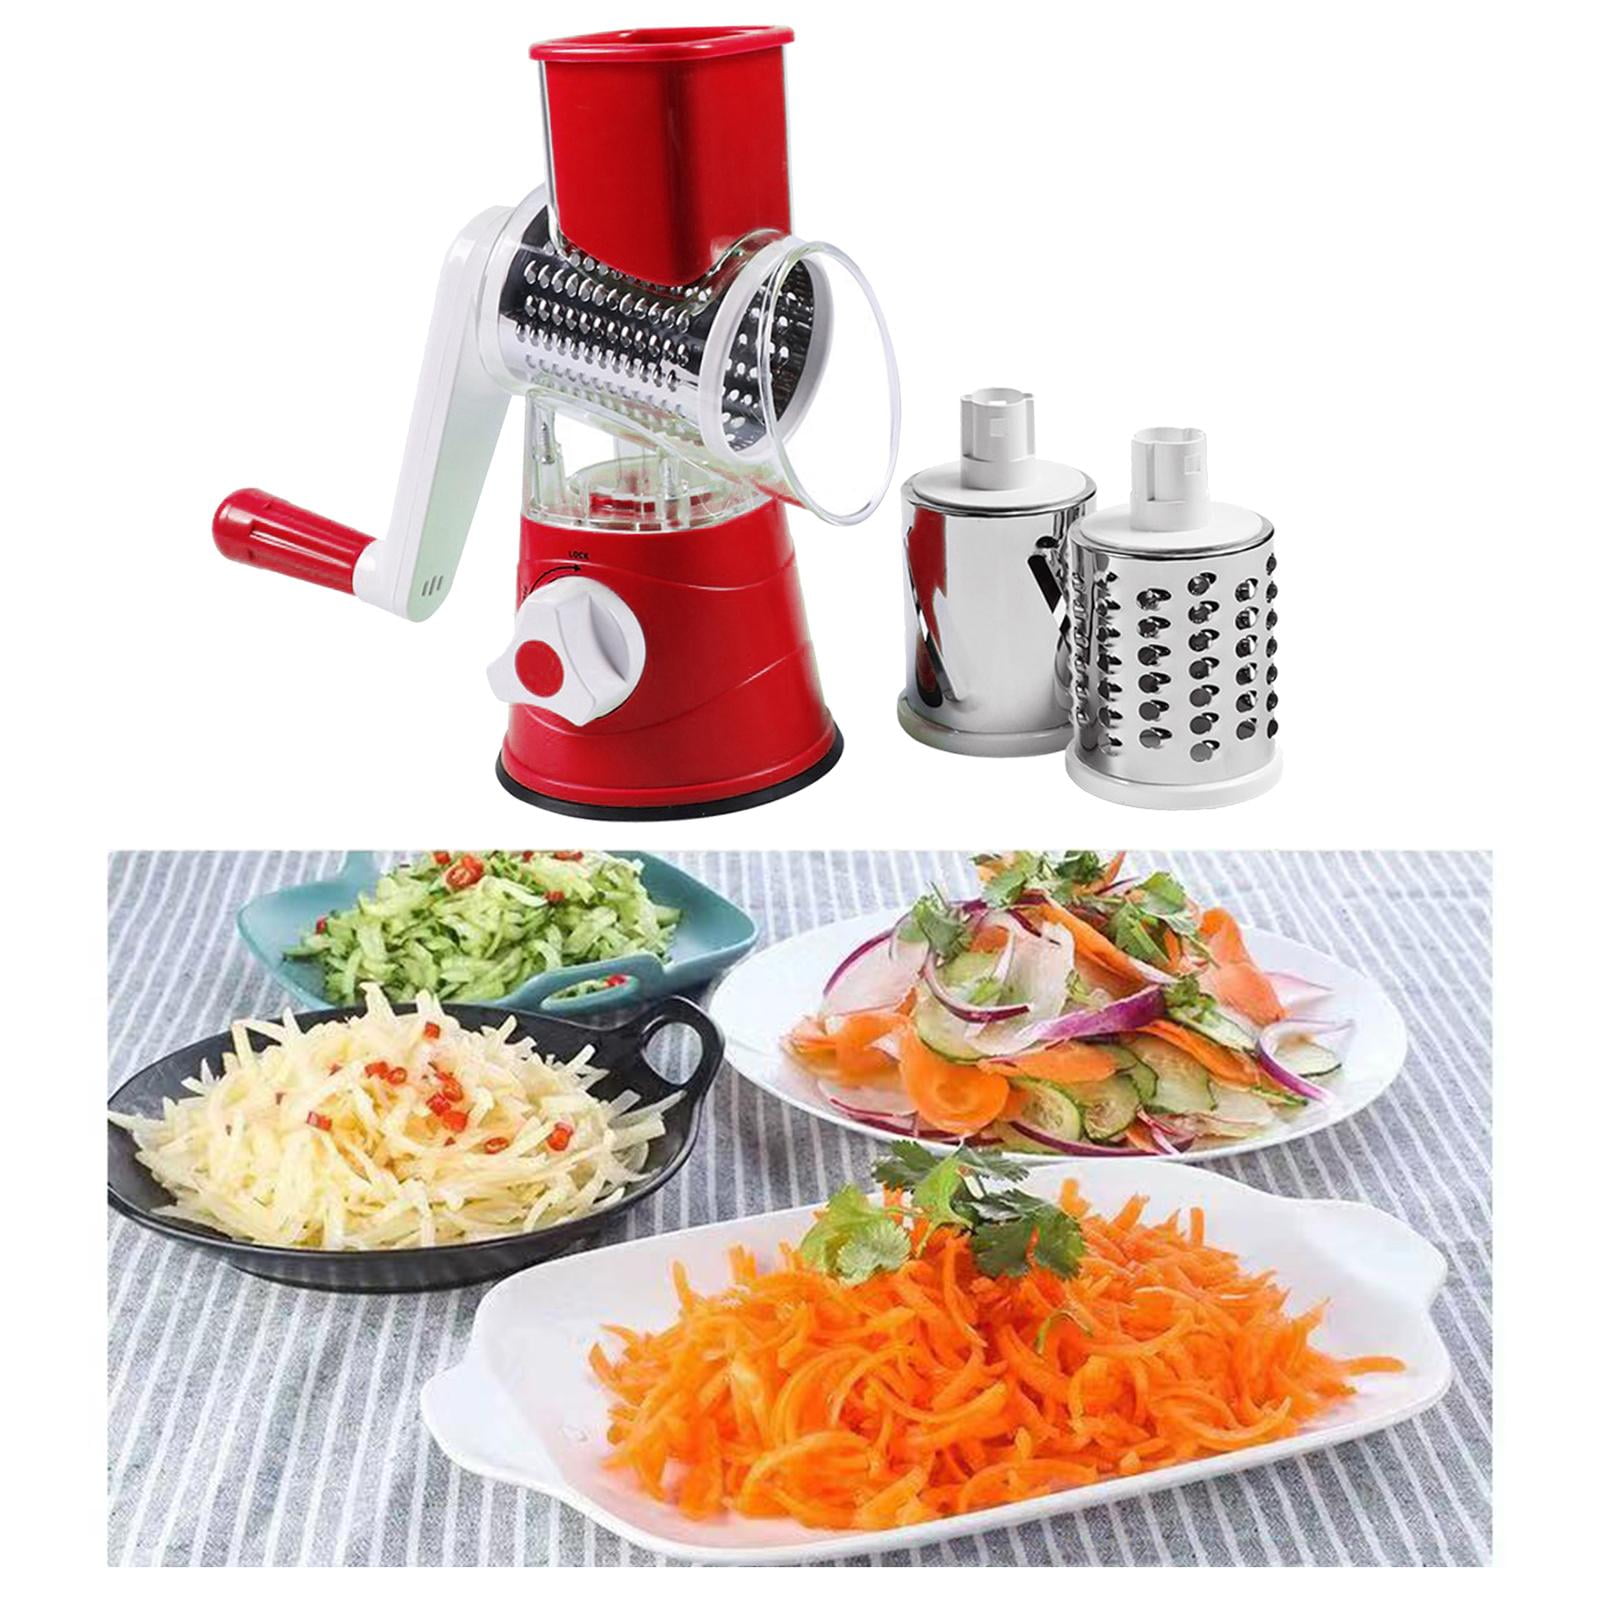 Southern Homewares 2 in 1 Deluxe Hand Crank Rotary Drum Grater Shredder  Slicer Kitchen Tool Cheese Fruits Vegetables Nuts